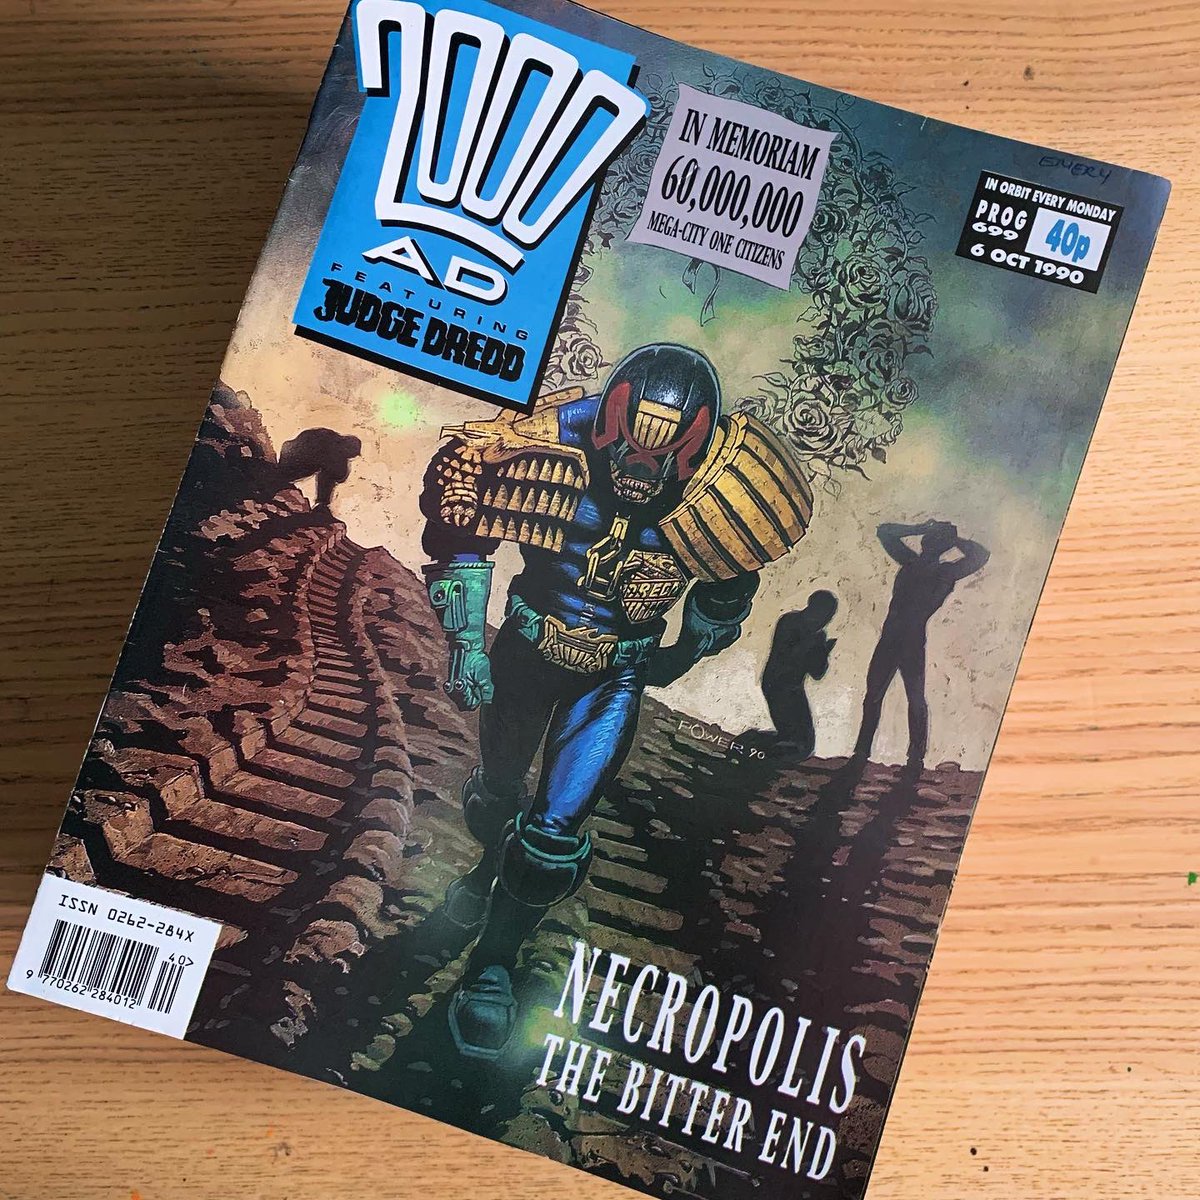 Not got a big history with 2000AD so bought 50 comics off eBay. Let’s see how this goes.